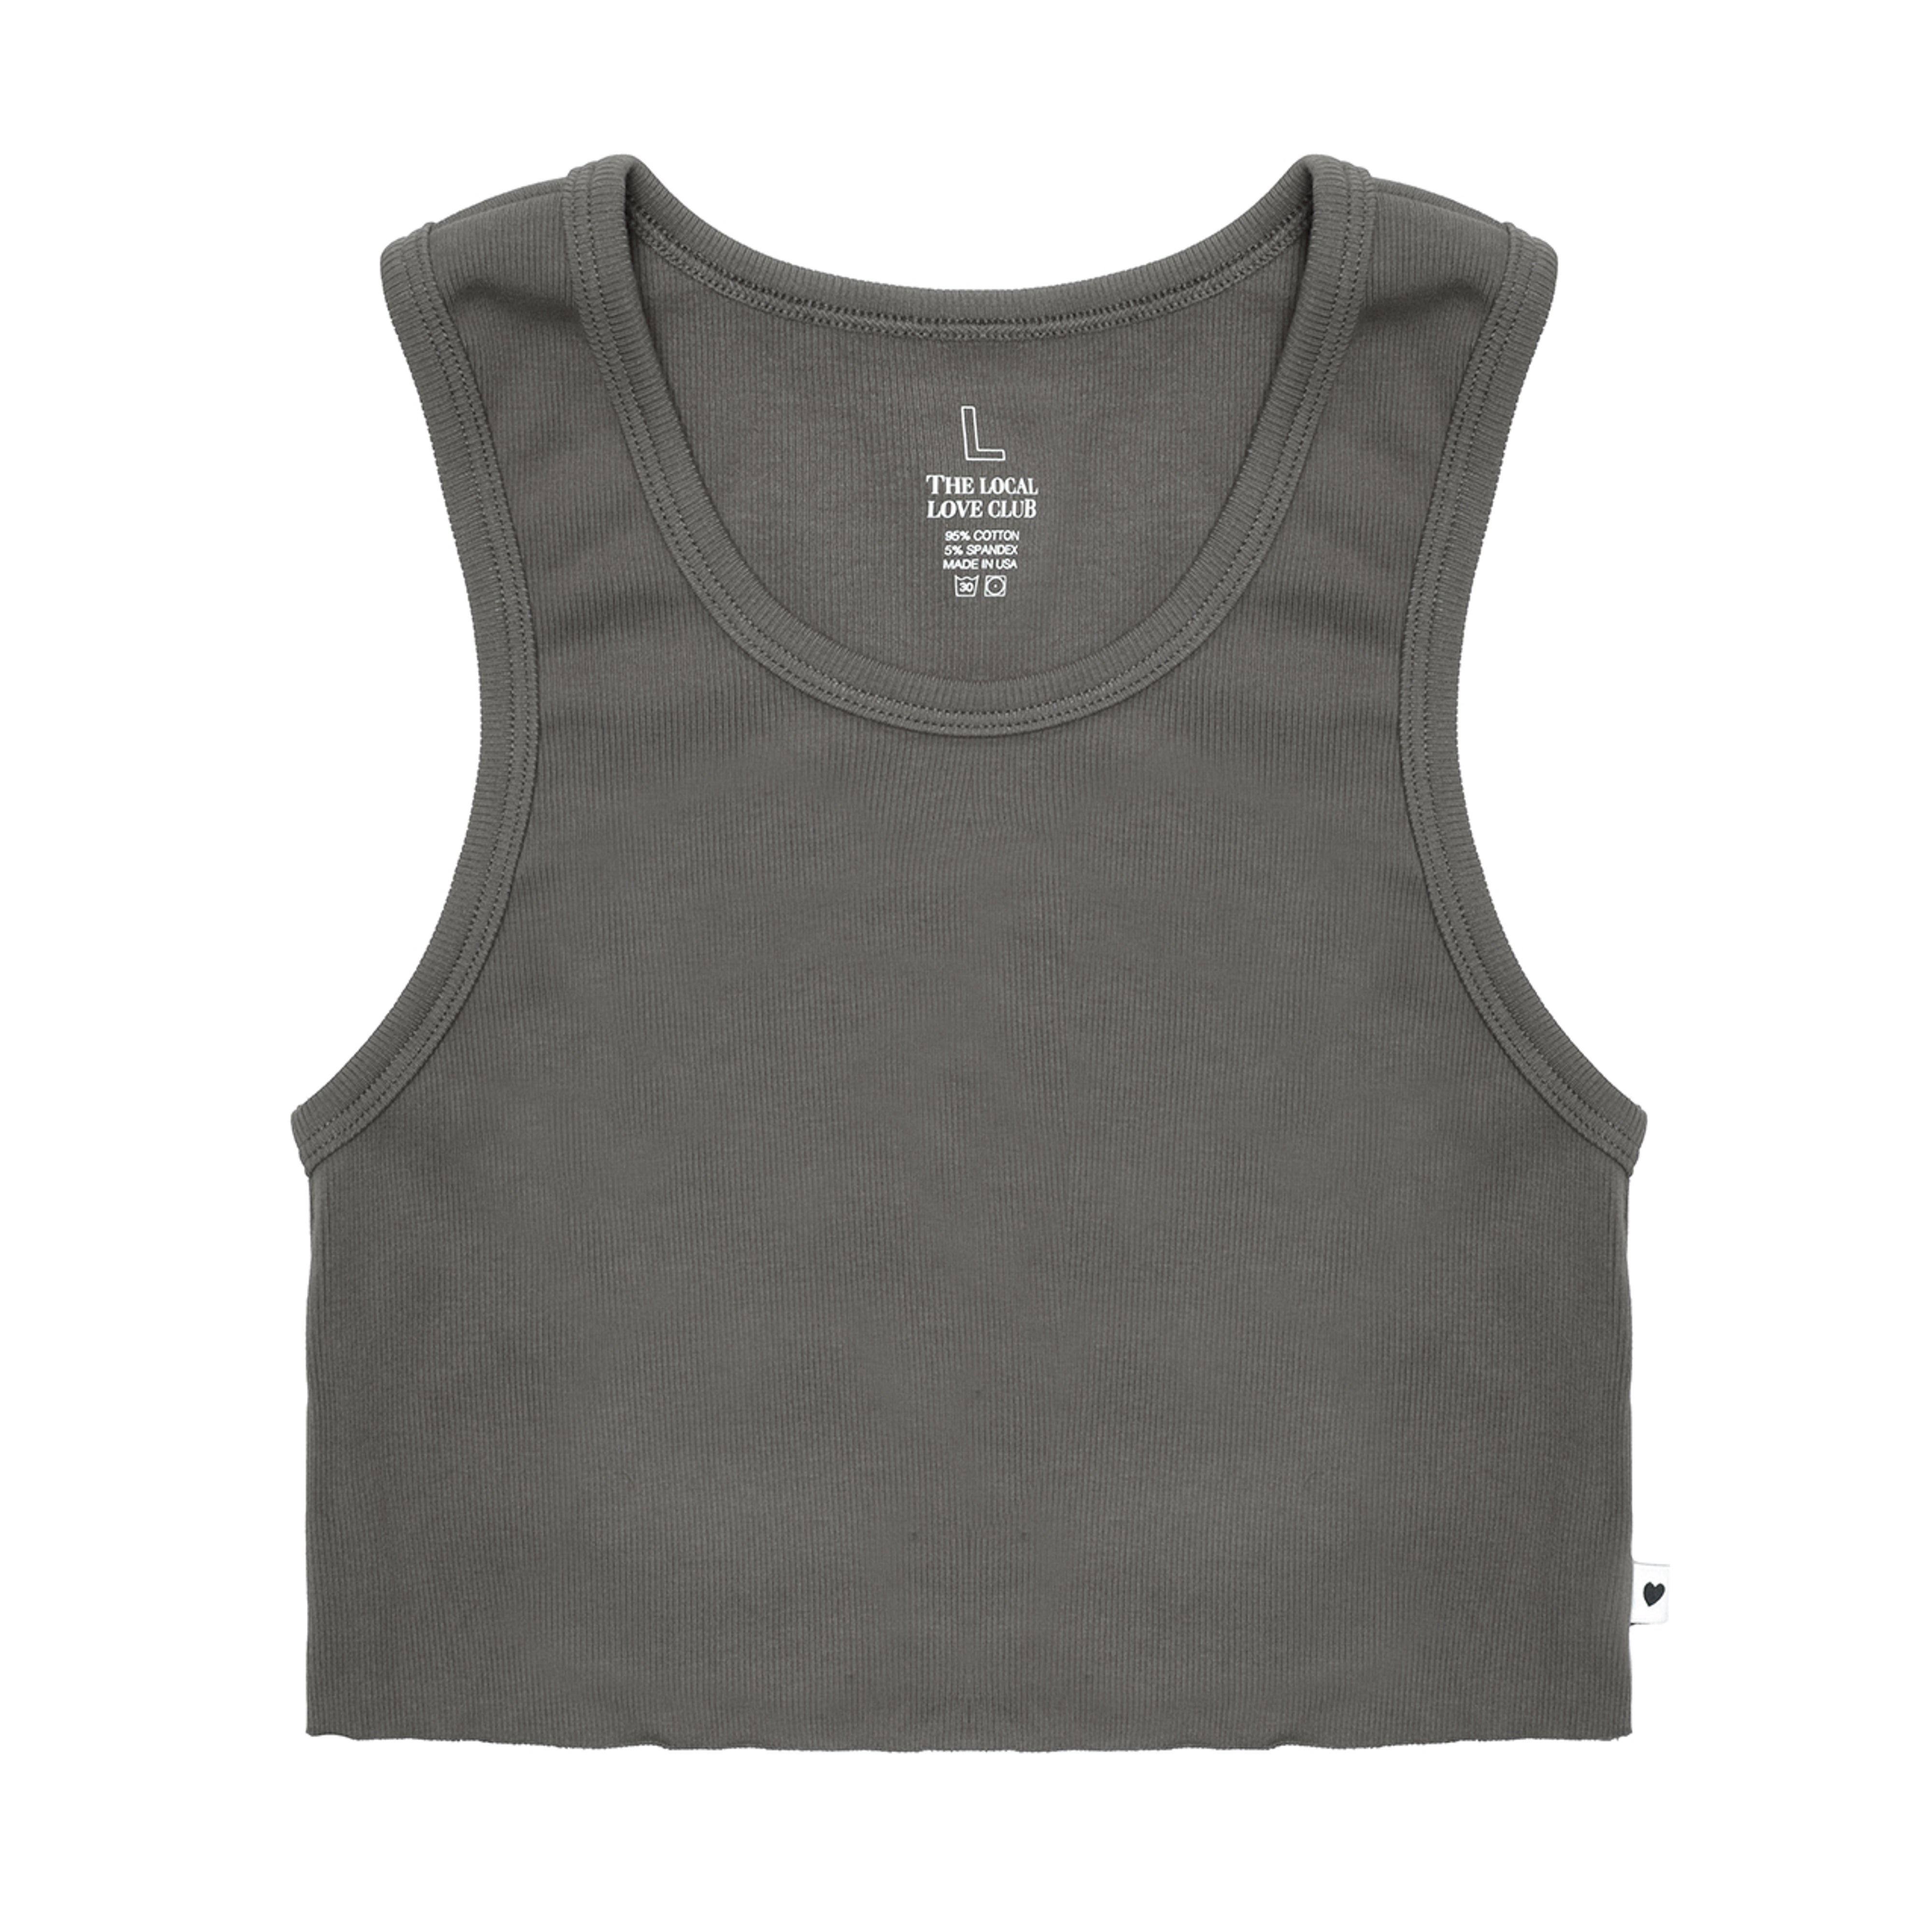 Vitals Tank in Taupe